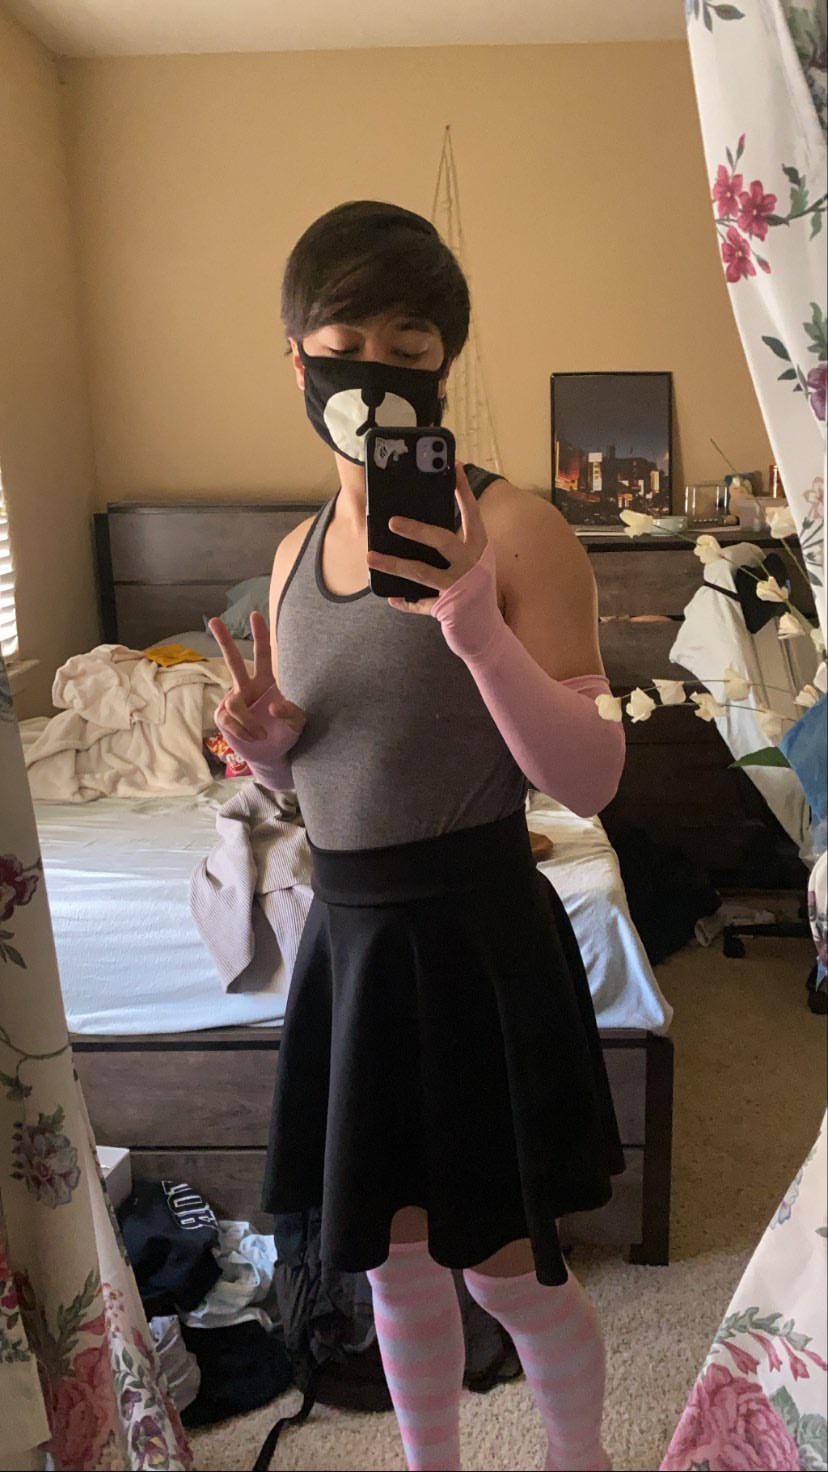 i’m pretty new to being a femboy, how do i look? 😋 | Scrolller